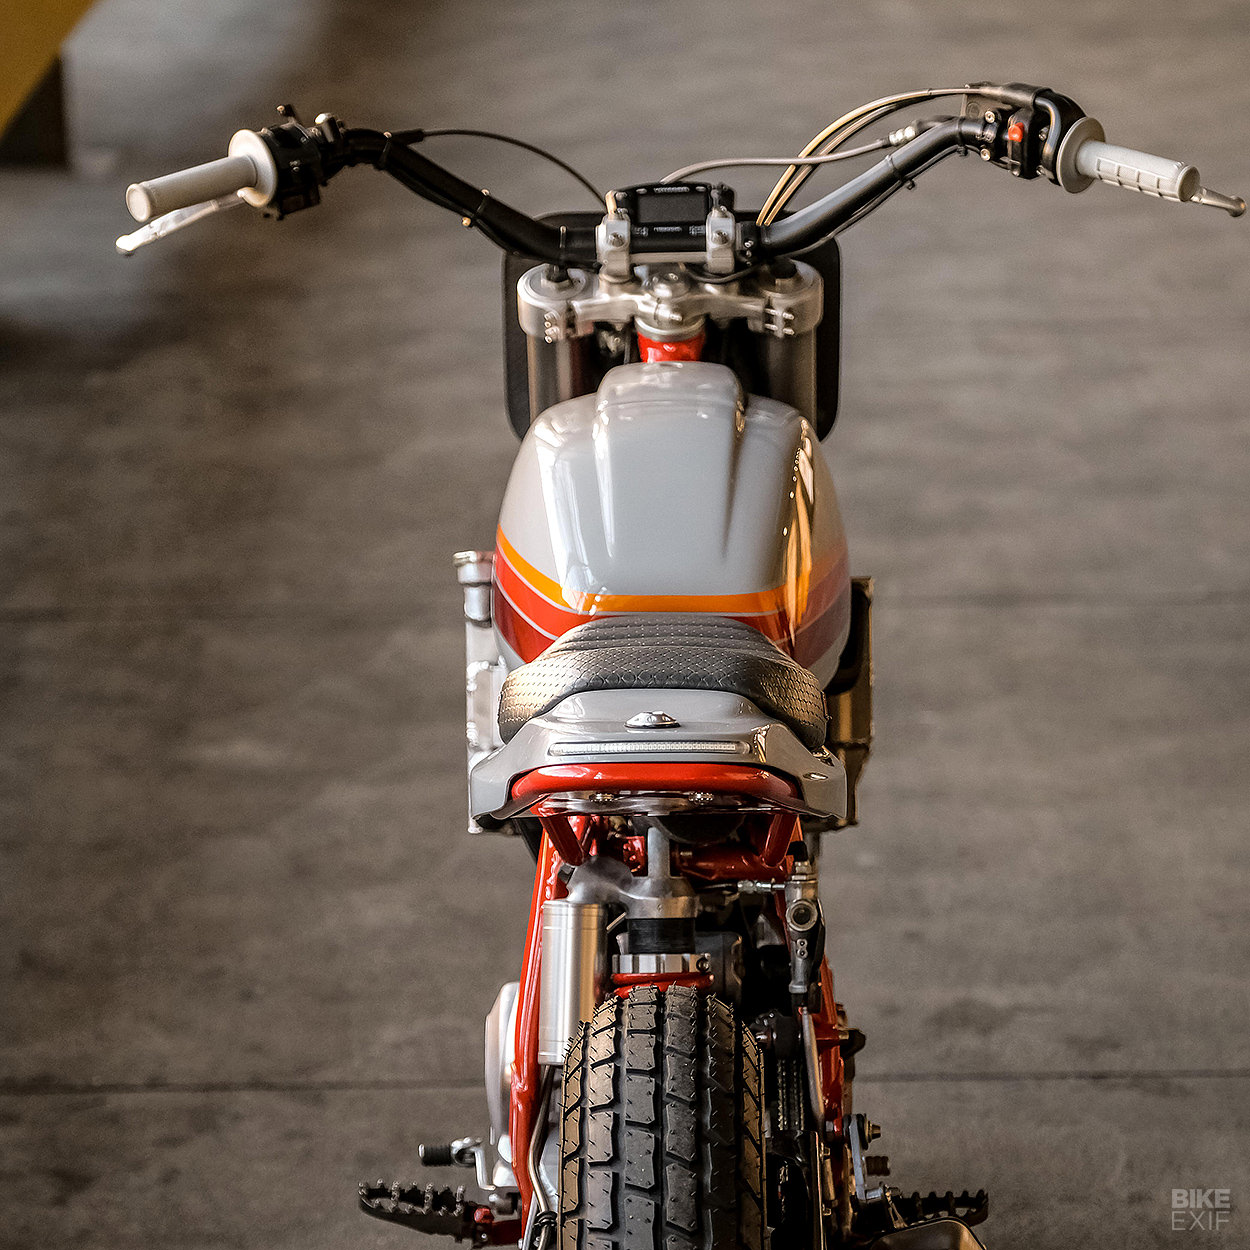 Daily Driver: A KTM Duke II street tracker motorcycle by Dubstyle Designs